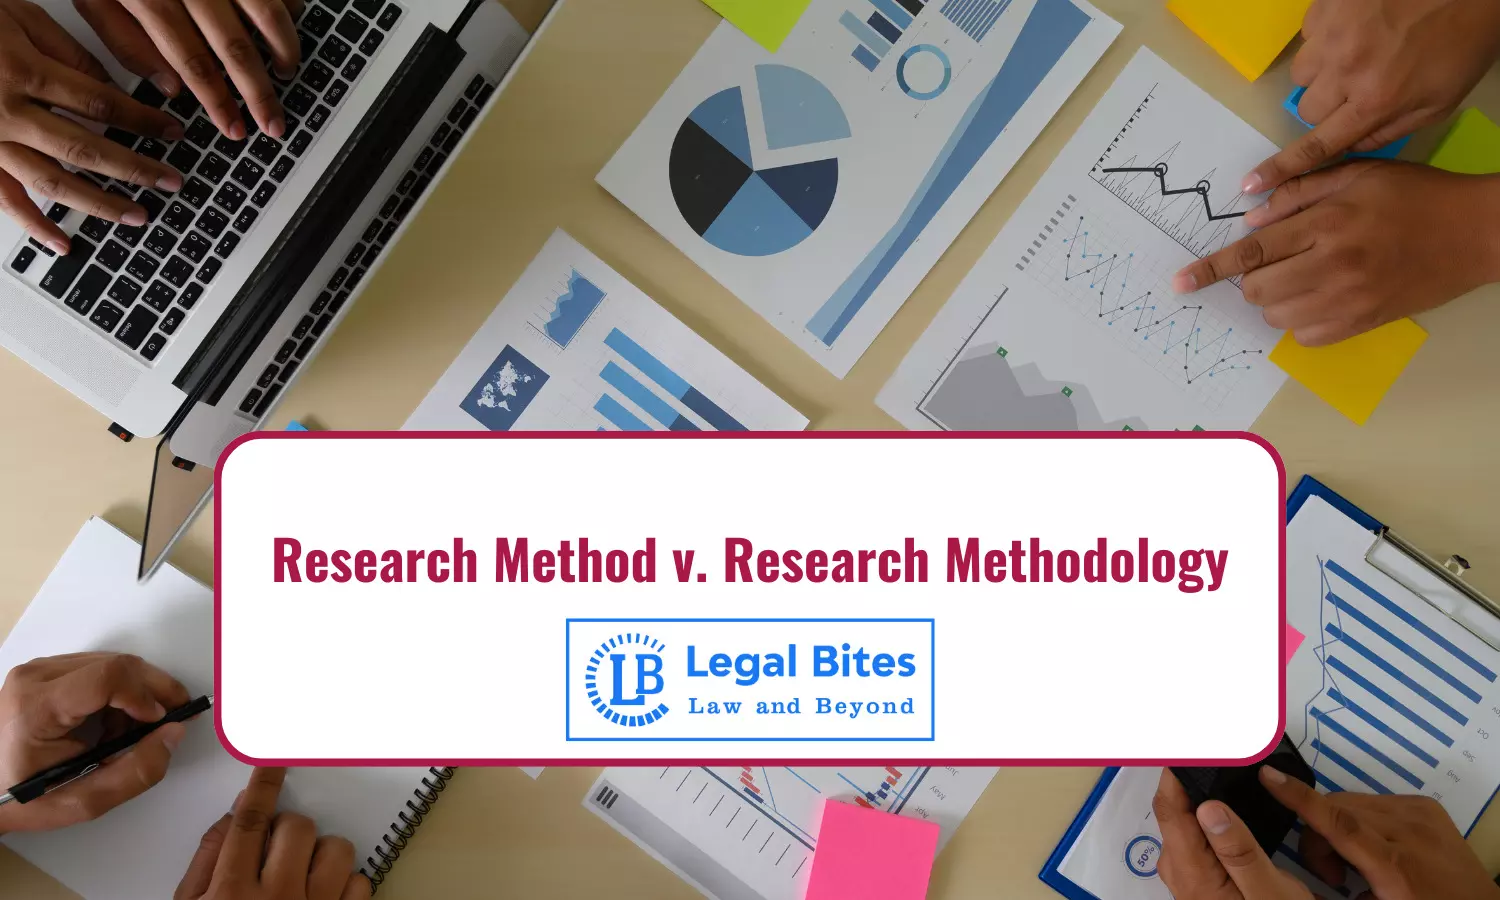 Research Method v. Research Methodology